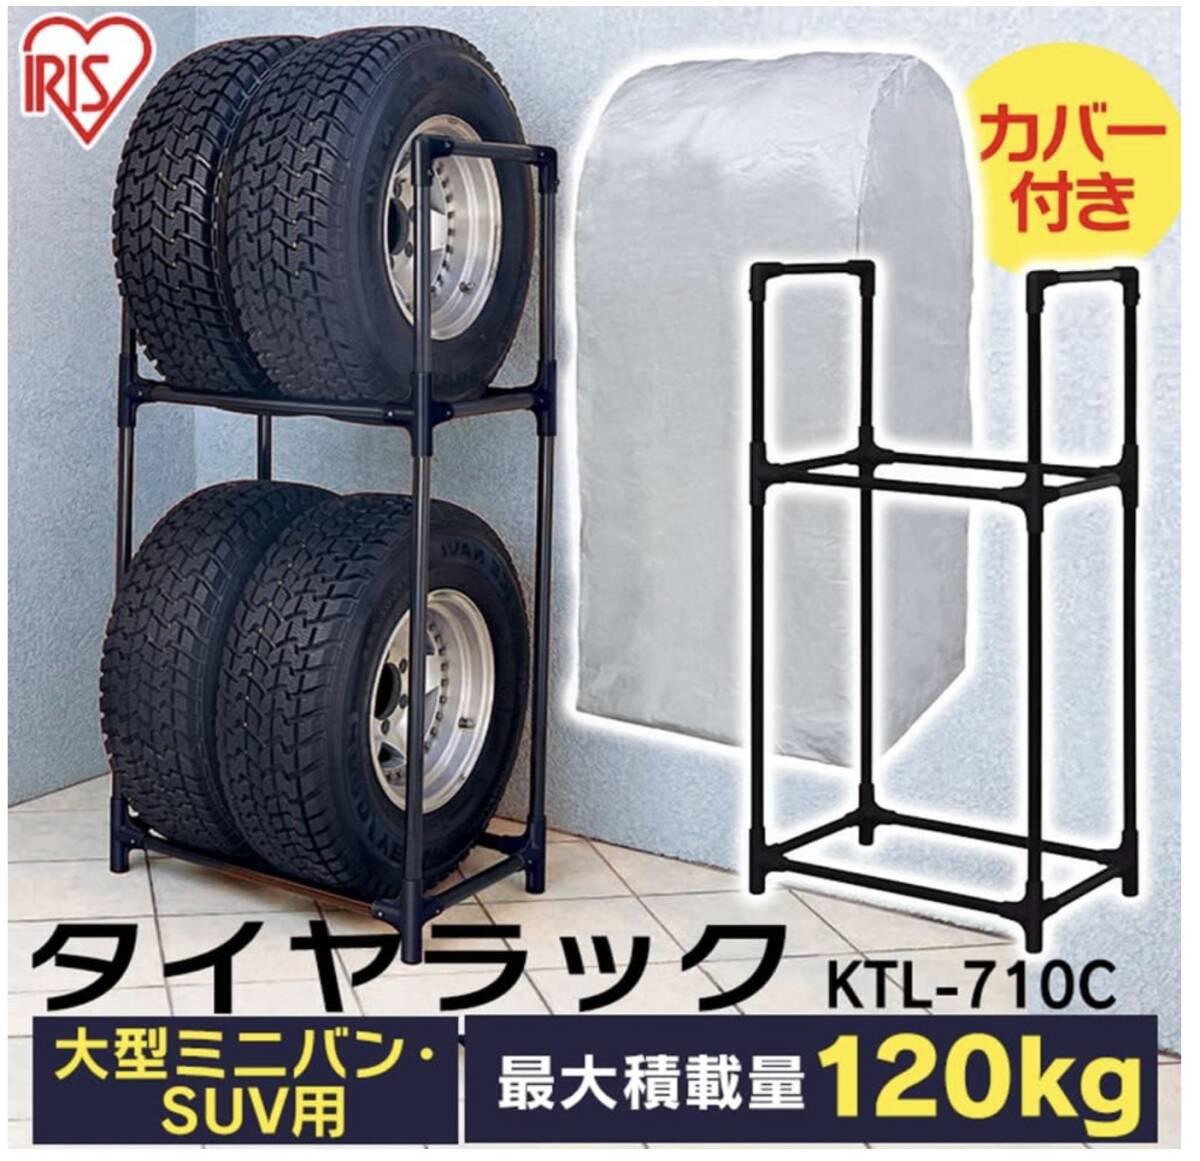 * free shipping * Iris o-yama large minivan *RV for tire rack cover (CV-710) attaching width 71× depth 45× height 144cm, withstand load 120kg KTL-710C